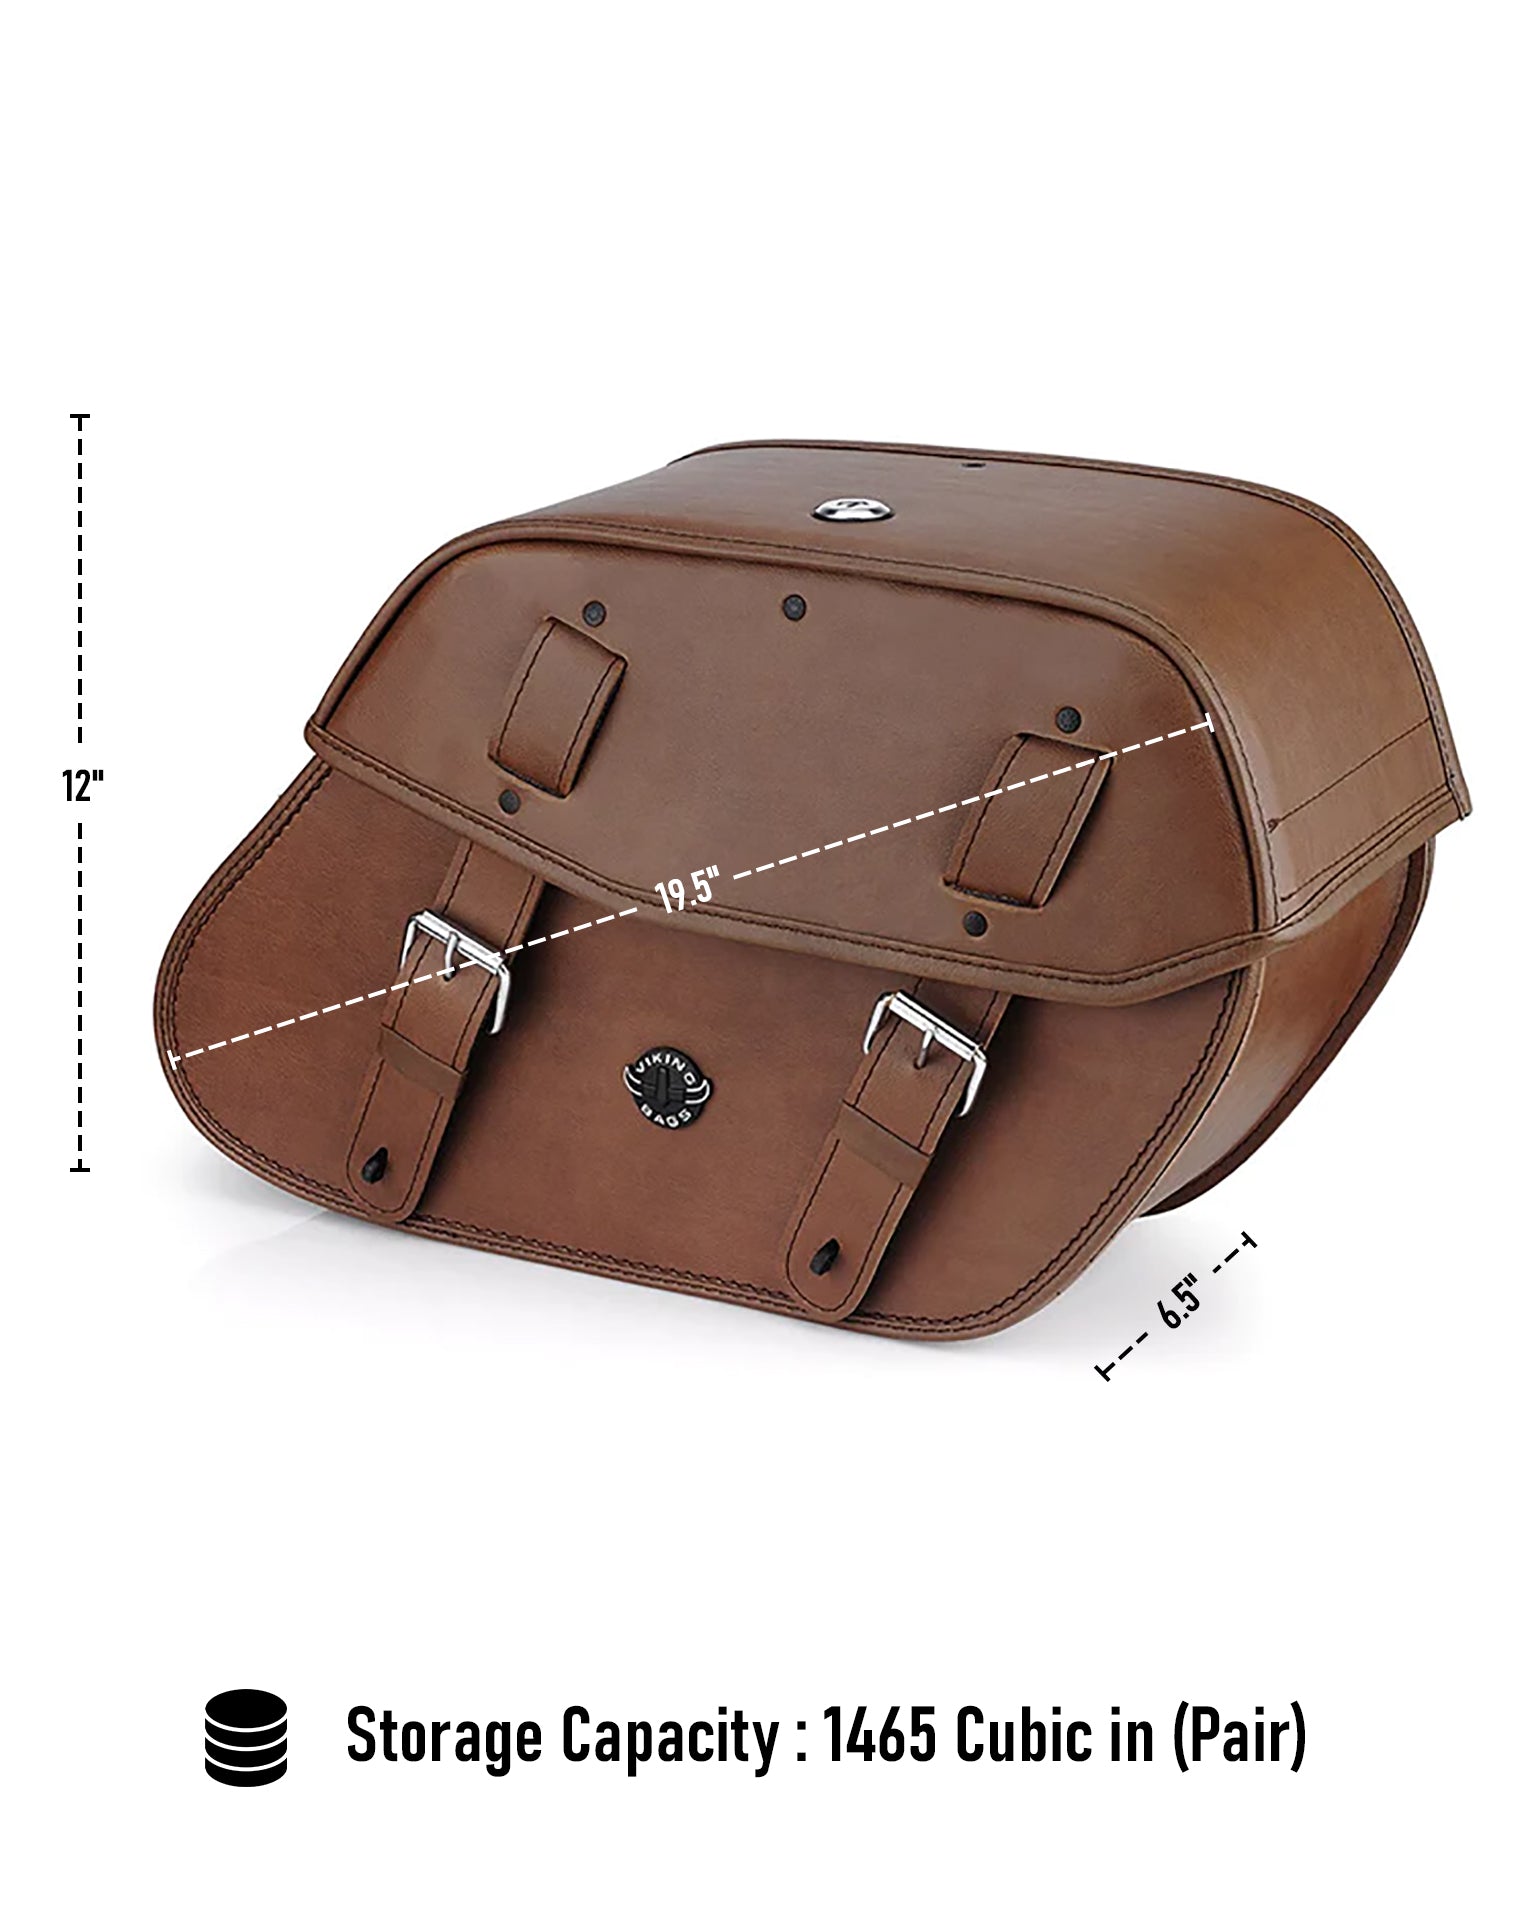 Viking Odin Brown Large Victory V92C Leather Motorcycle Saddlebags Can Store Your Ridings Gears